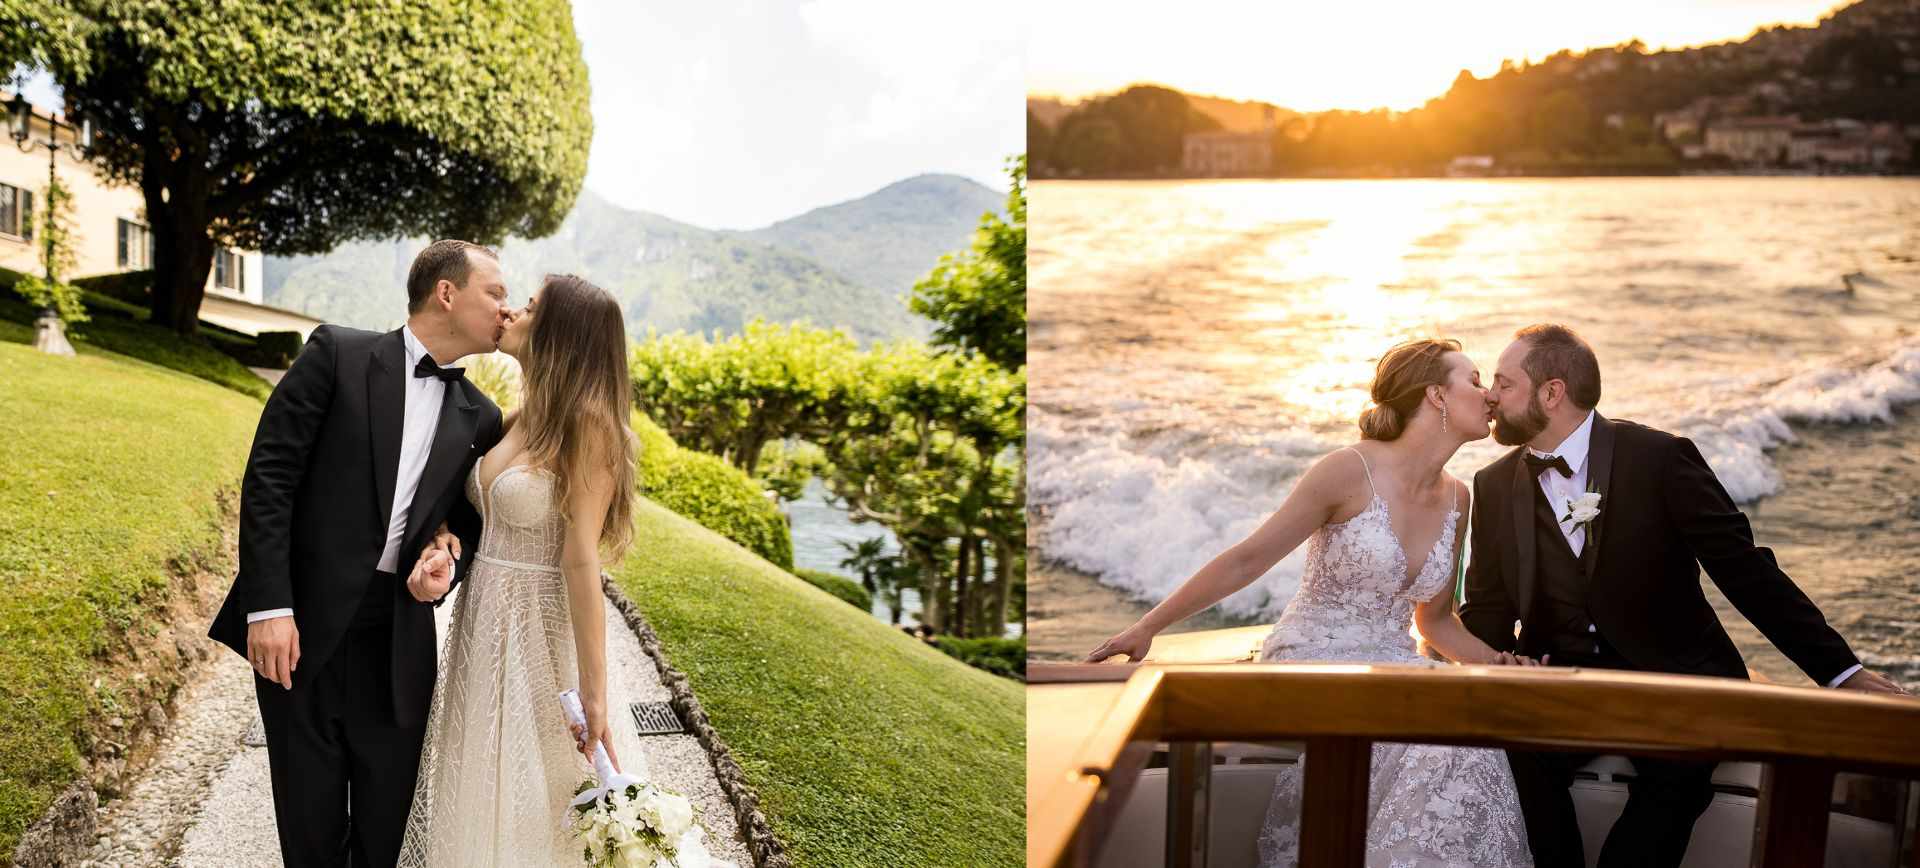 lake como elopement package - italy vow renewal in europe